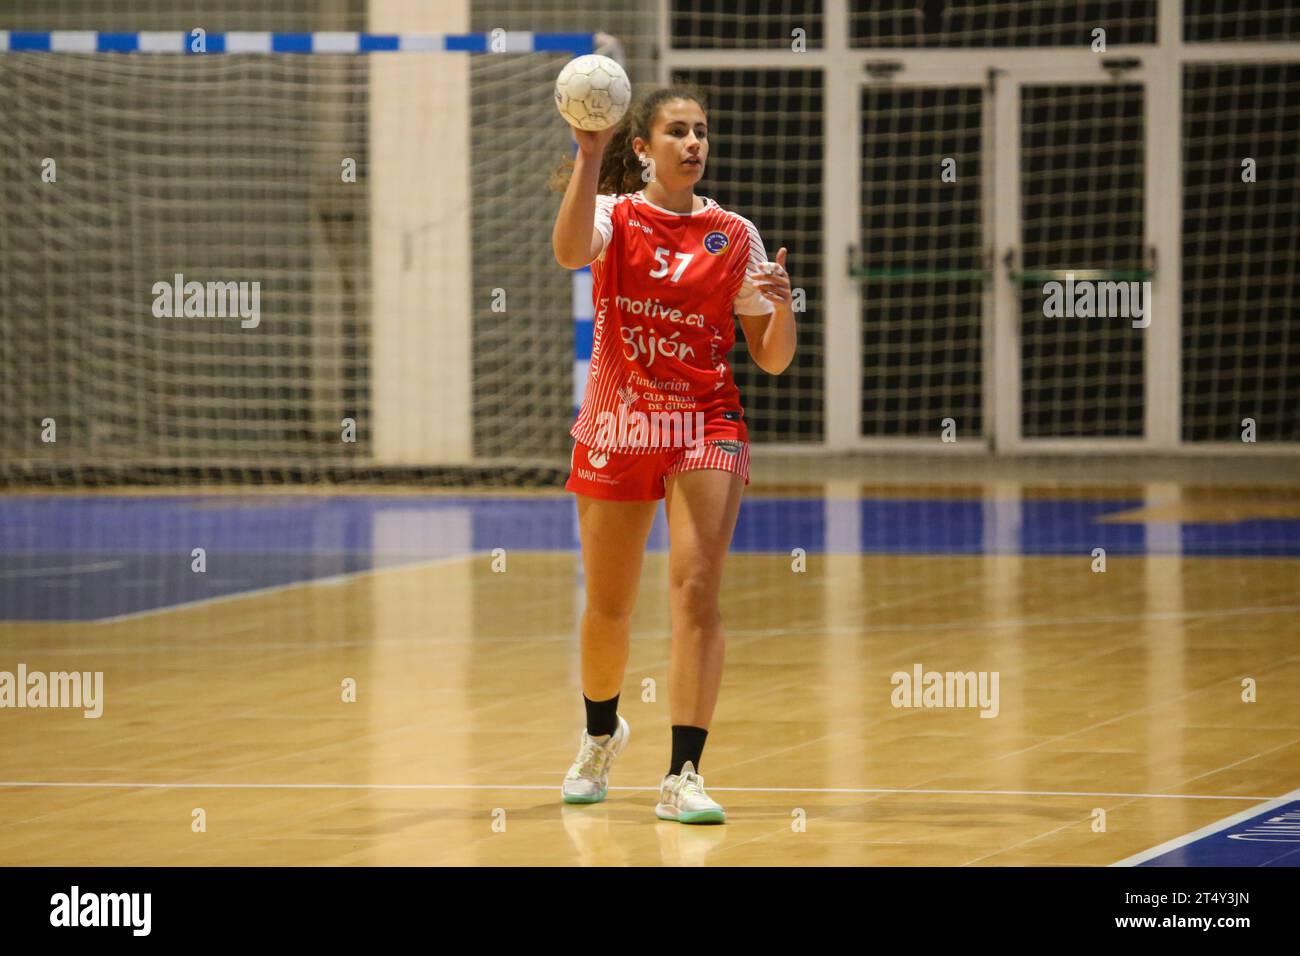 Oviedo, Spain. 1st Nov, 2023. The player of Motive.co Gijon Balonmano La Calzada, Rocio Rojas (57) with the ball during the 9th Matchday of the Liga Guerreras Iberdrola between Lobas Global Atac Oviedo and Motive.co Gijon Balonmano La Calzada, on November 1, 2023, at the Florida Arena Municipal Sports Center, in Oviedo, Spain. (Photo by Alberto Brevers/Pacific Press) Credit: Pacific Press Media Production Corp./Alamy Live News Stock Photo